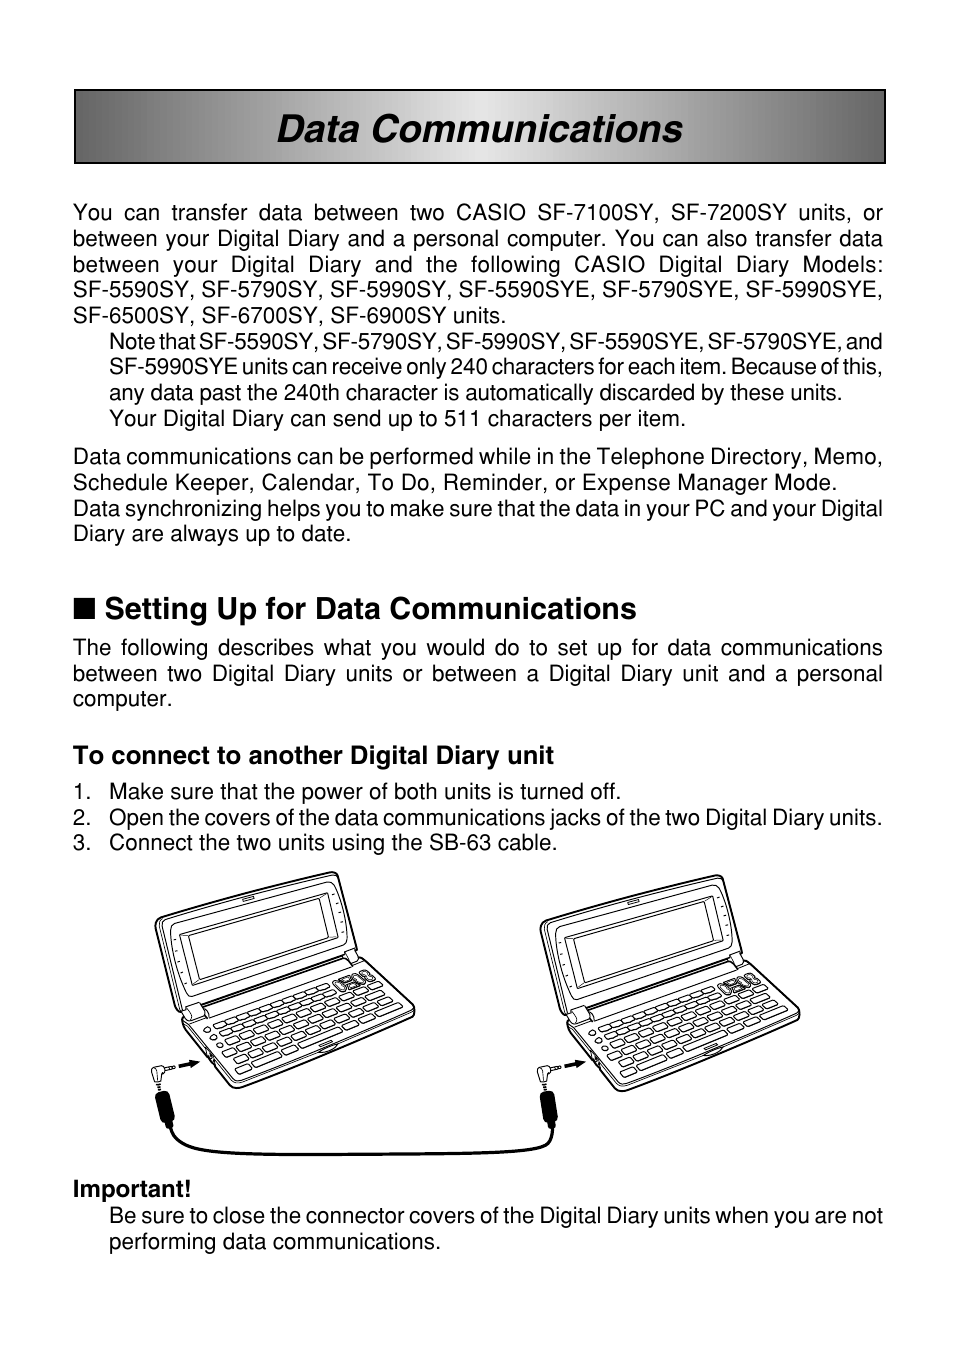 Data communications, Setting up for data communications | Casio SF-7100SY  User Manual | Page 70 / 83